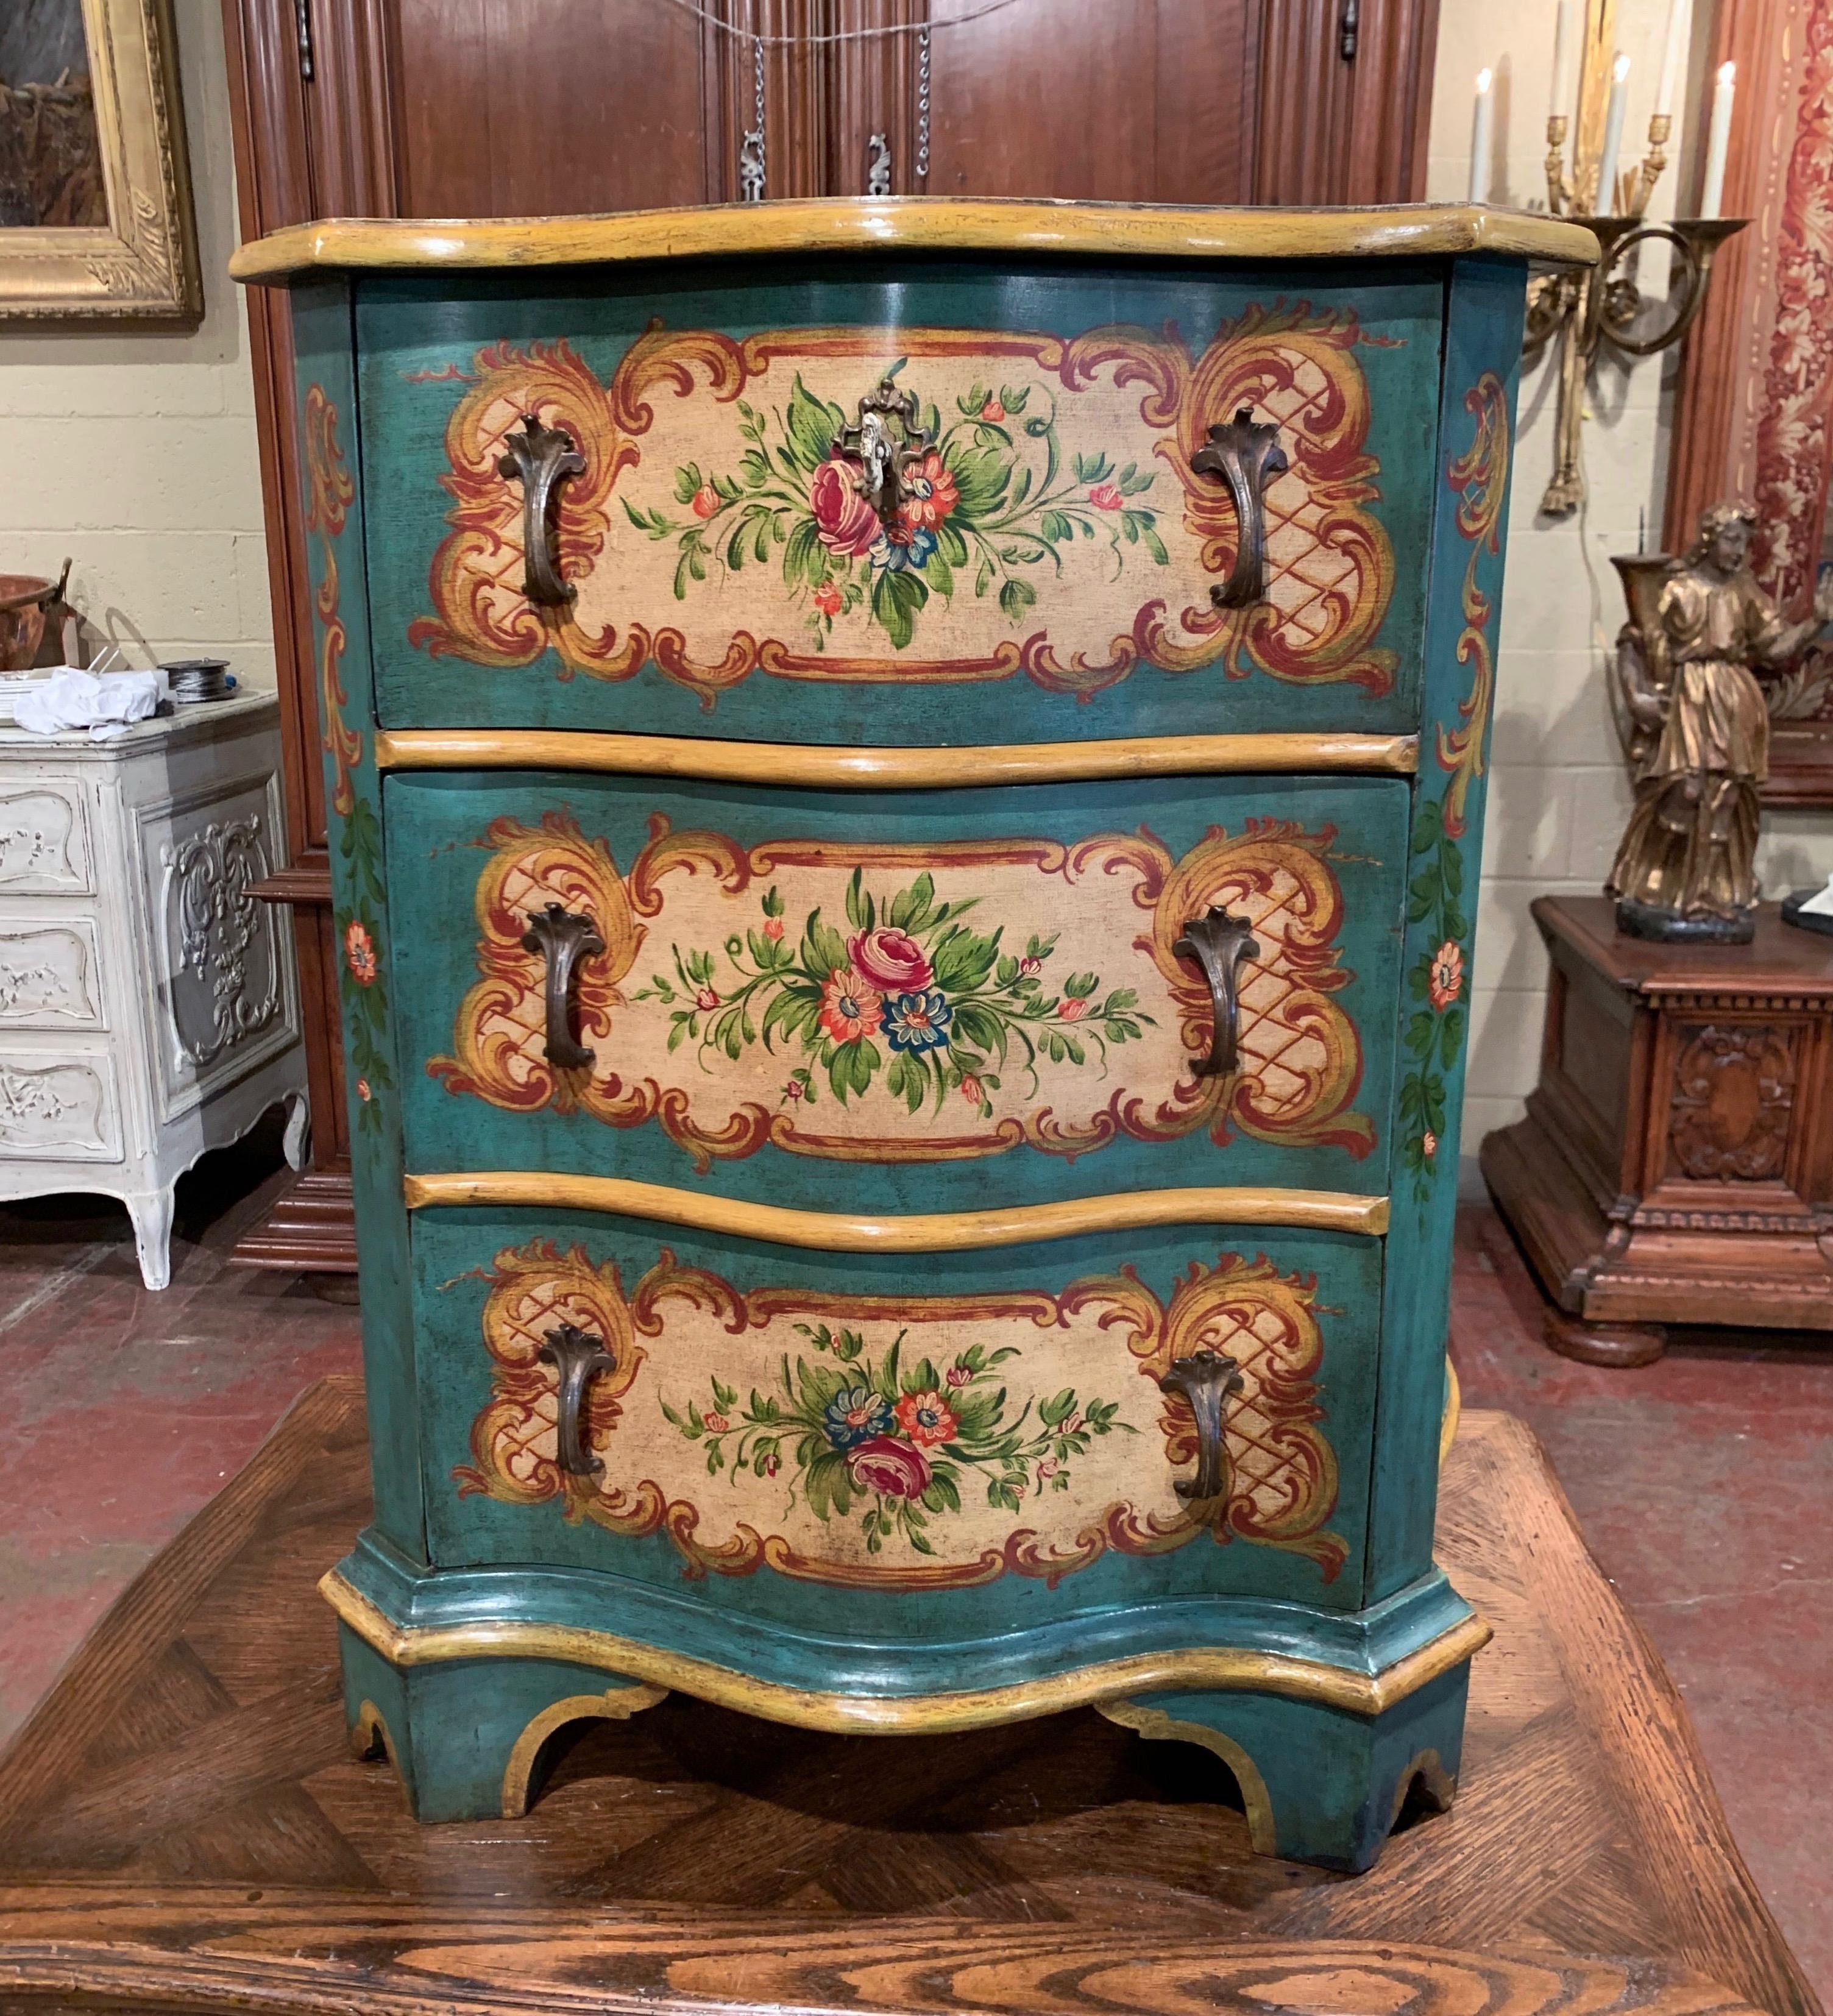 Italian Mid-20th Century Venetian Serpentine Chest of Drawers with Painted Floral Decor